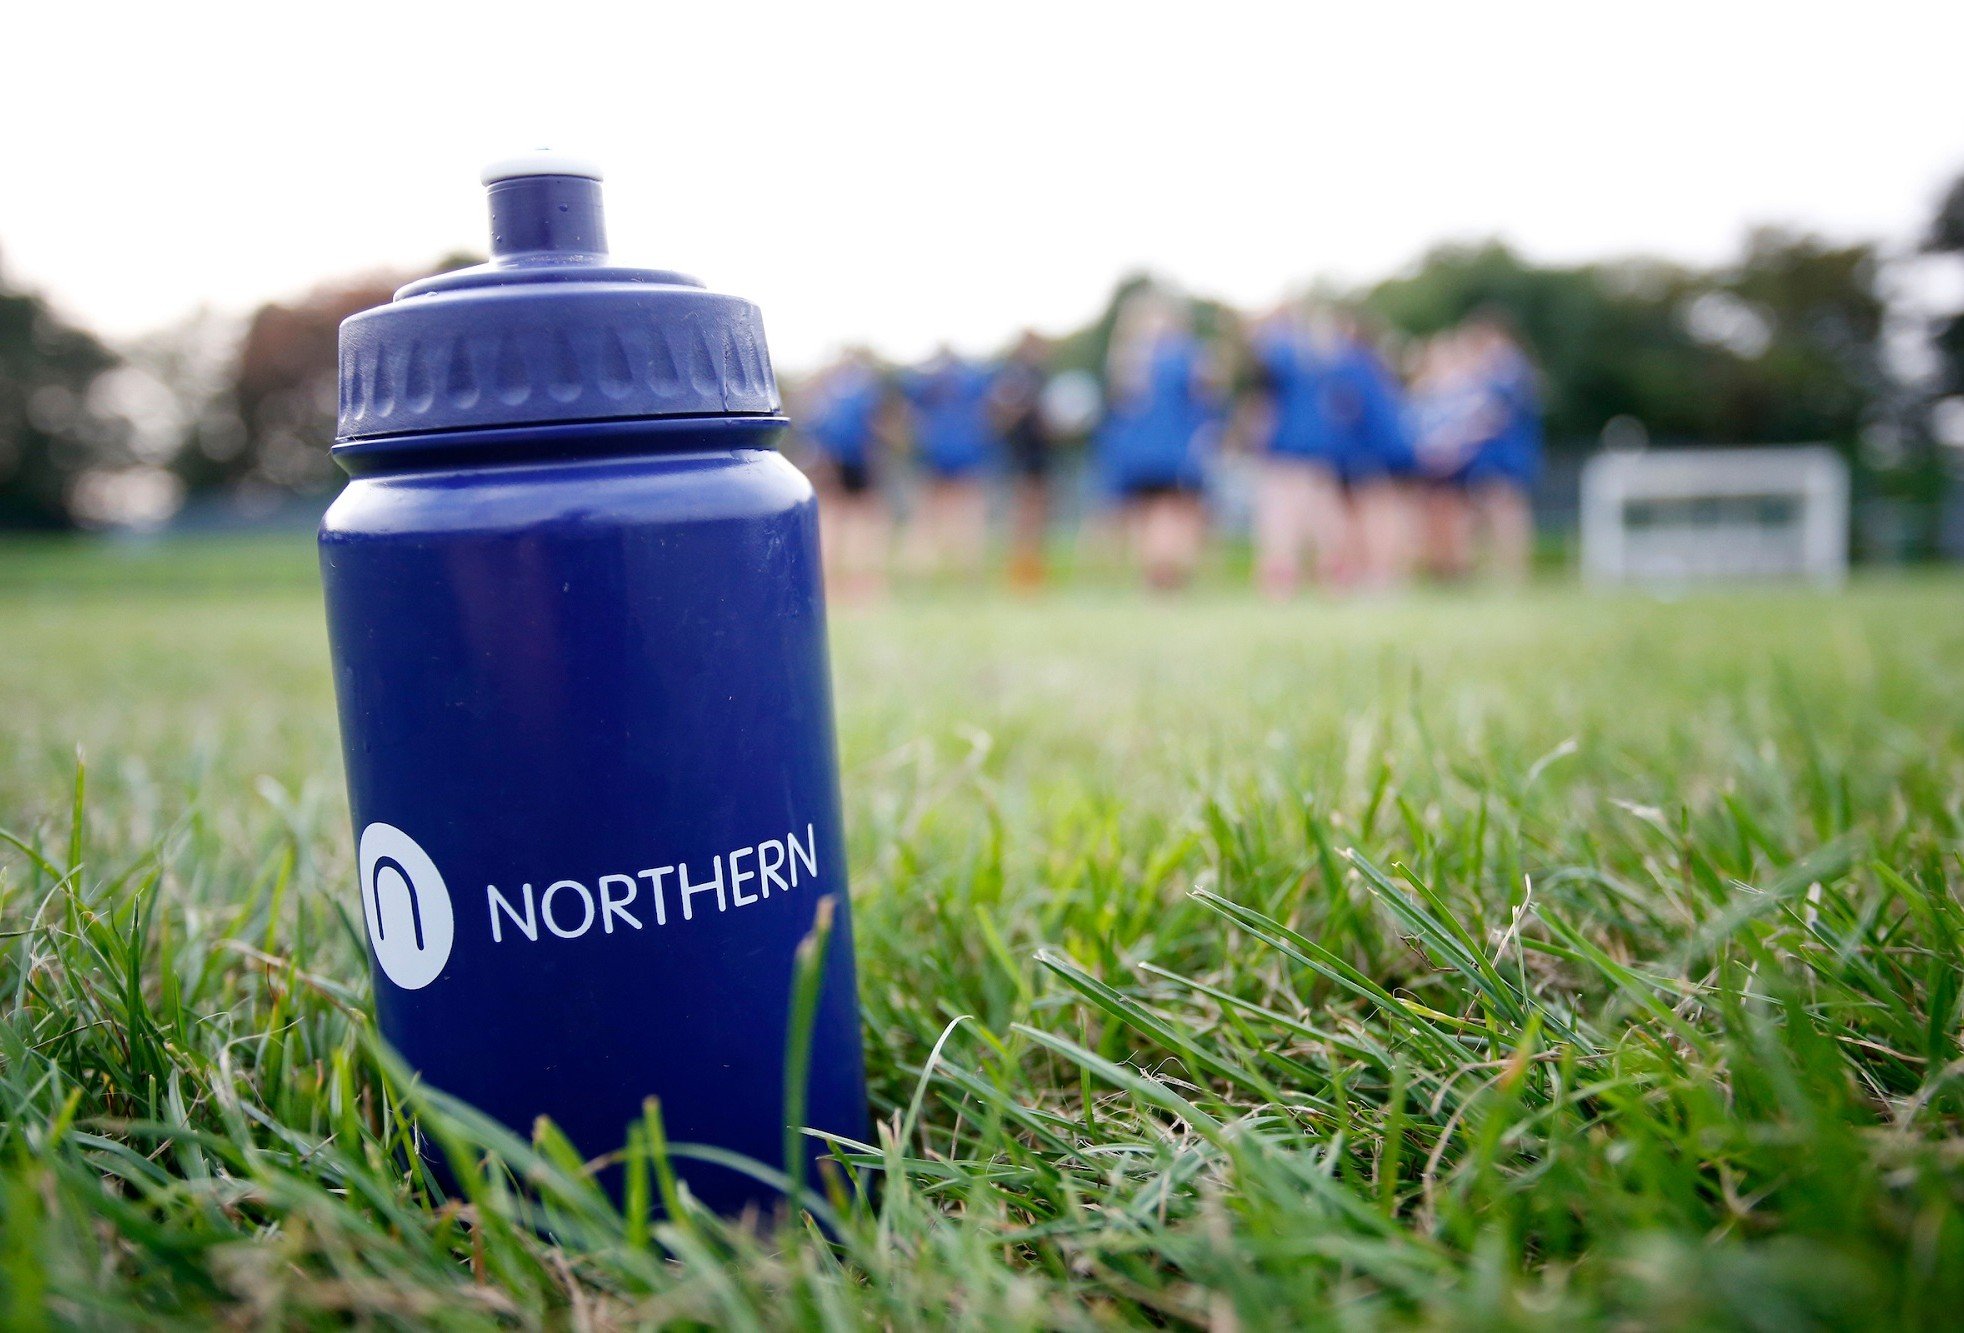 image-shows-northern-branded-water-bottle